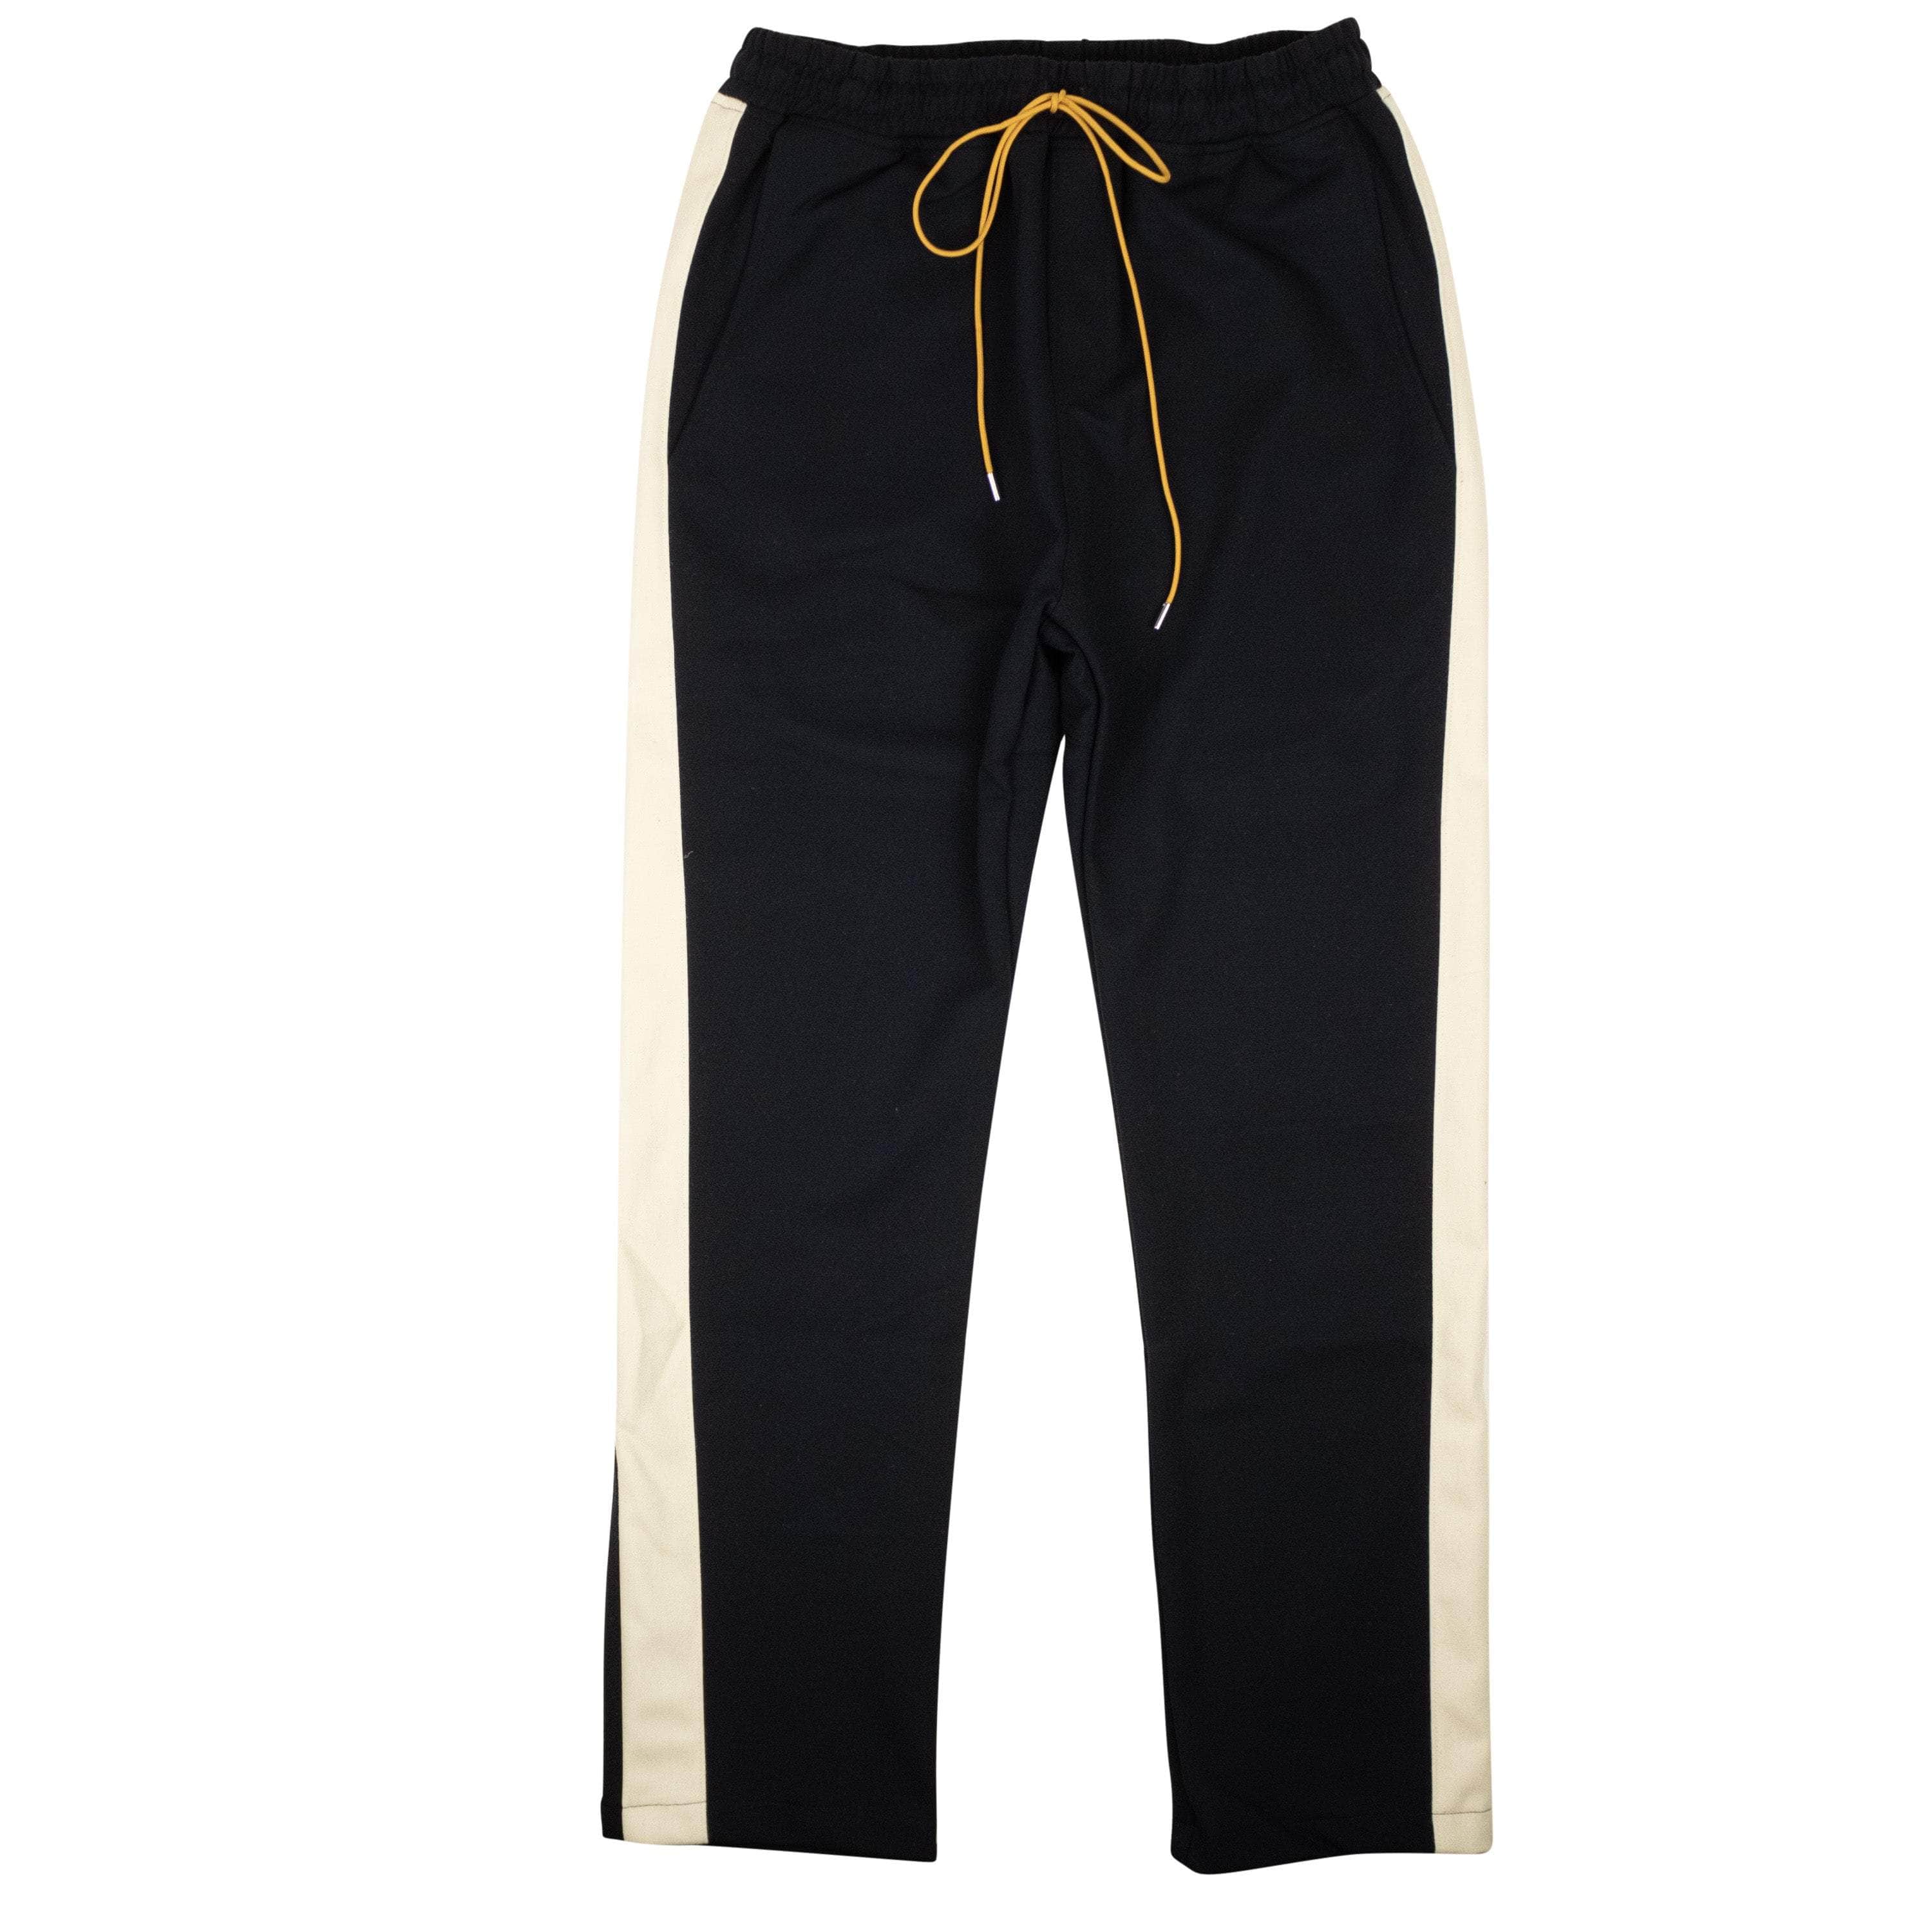 Rhude 250-500, channelenable-all, chicmi, couponcollection, gender-mens, main-clothing, mens-joggers-sweatpants, mens-shoes, rhude, size-m, size-s, size-xl, size-xs, size-xxl Navy Boys Striped Traxedo